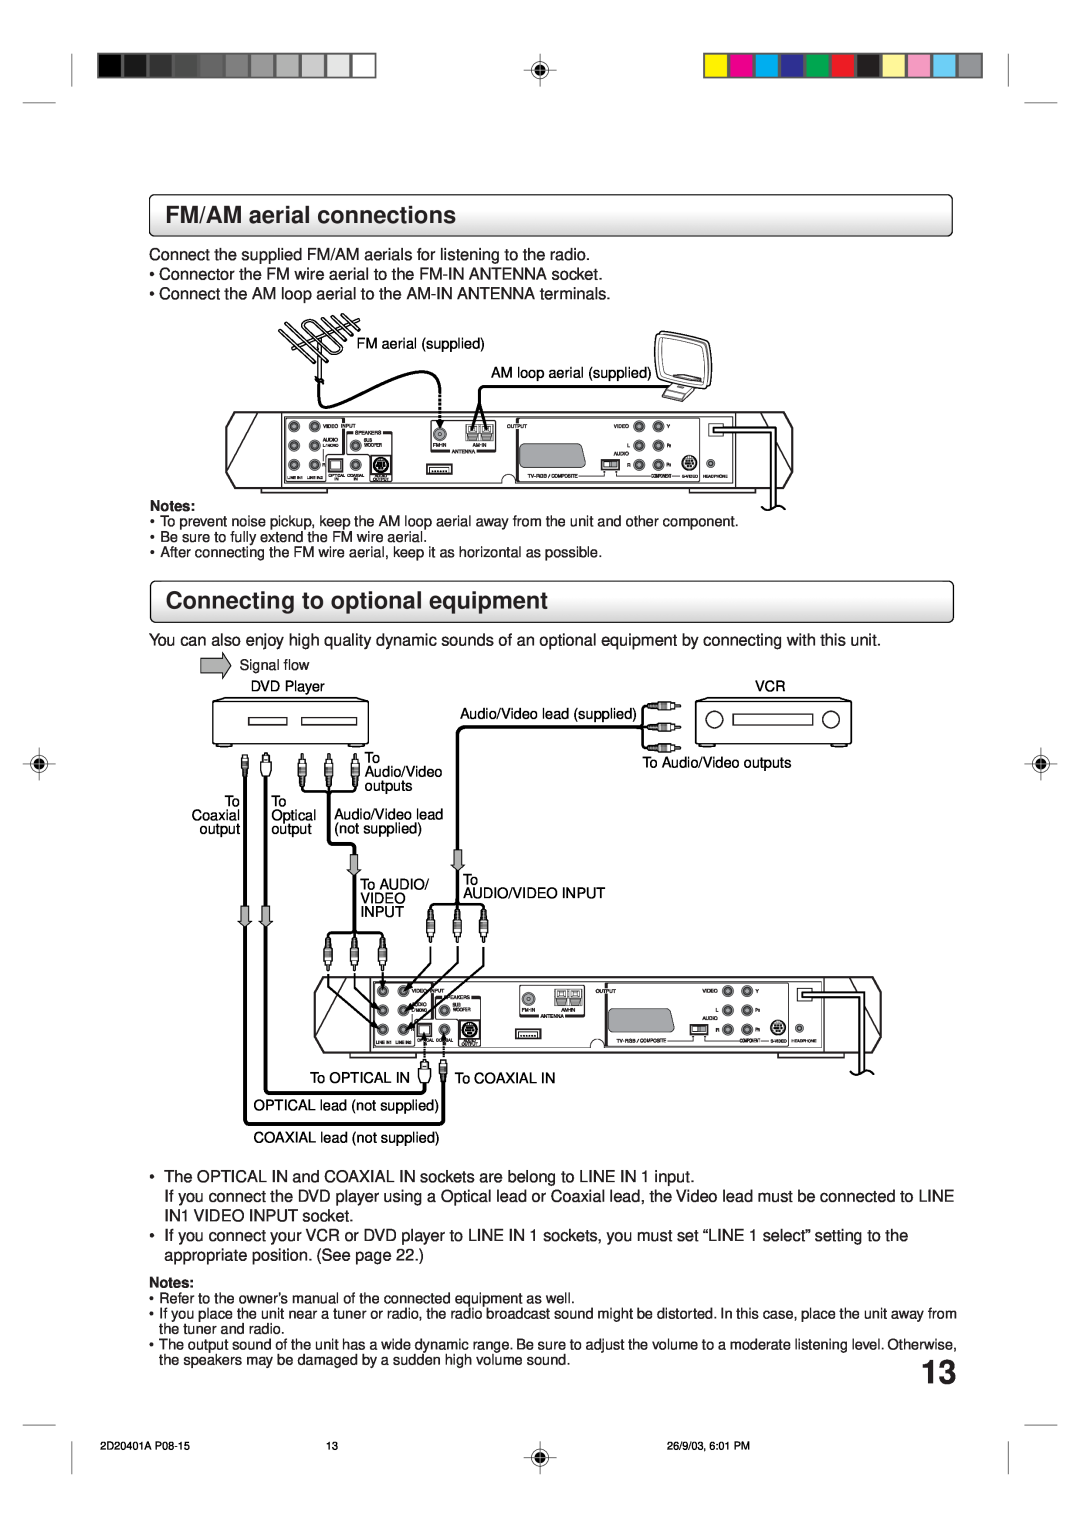 Kodak SD-63HK owner manual FM/AM aerial connections, Connecting to optional equipment 